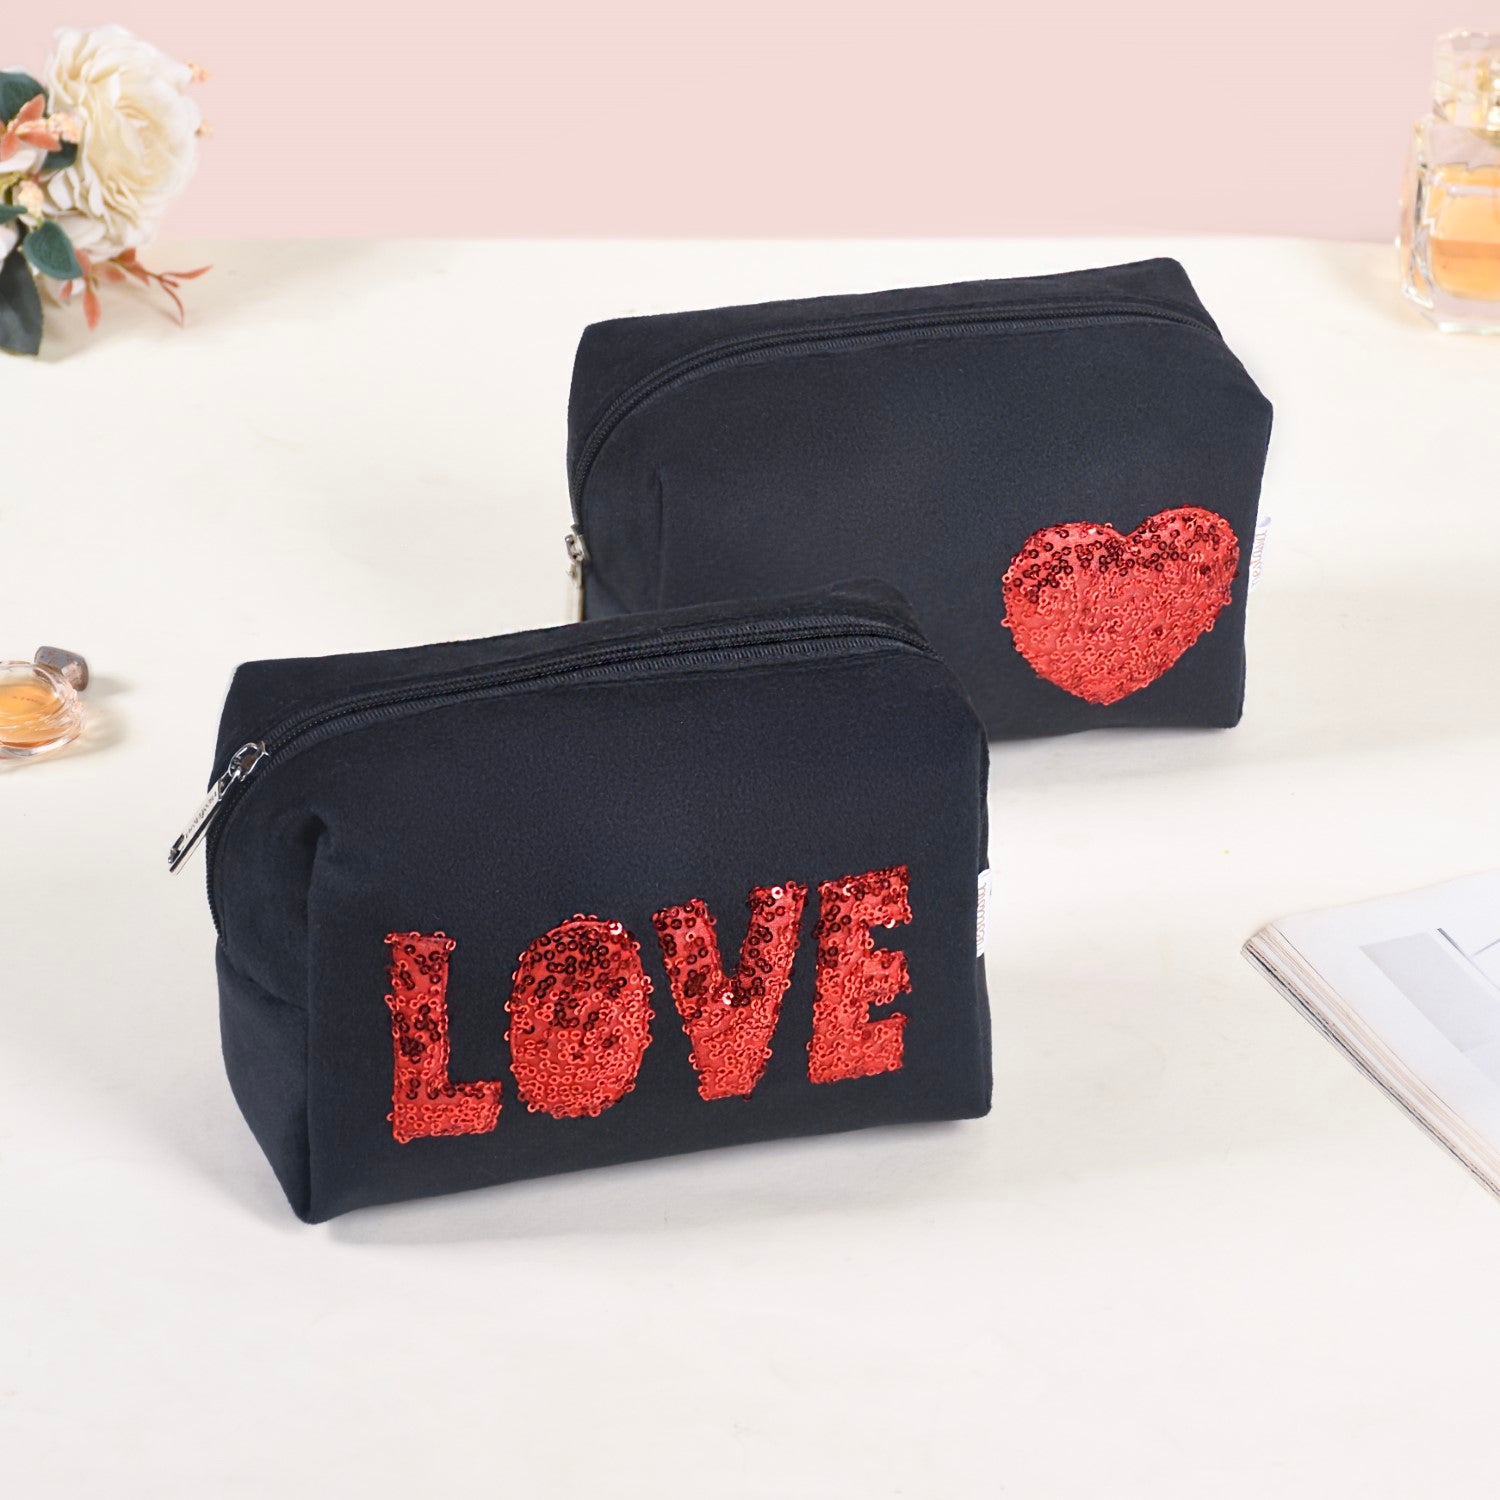 Buy Small Makeup Bag for Purse Travel Waterproof Cosmetic Bag Portable Mini Makeup  pouch with Zipper for Women Girlsï¼Ë†Blackï¼â€° Online at Low Prices in  India - Amazon.in